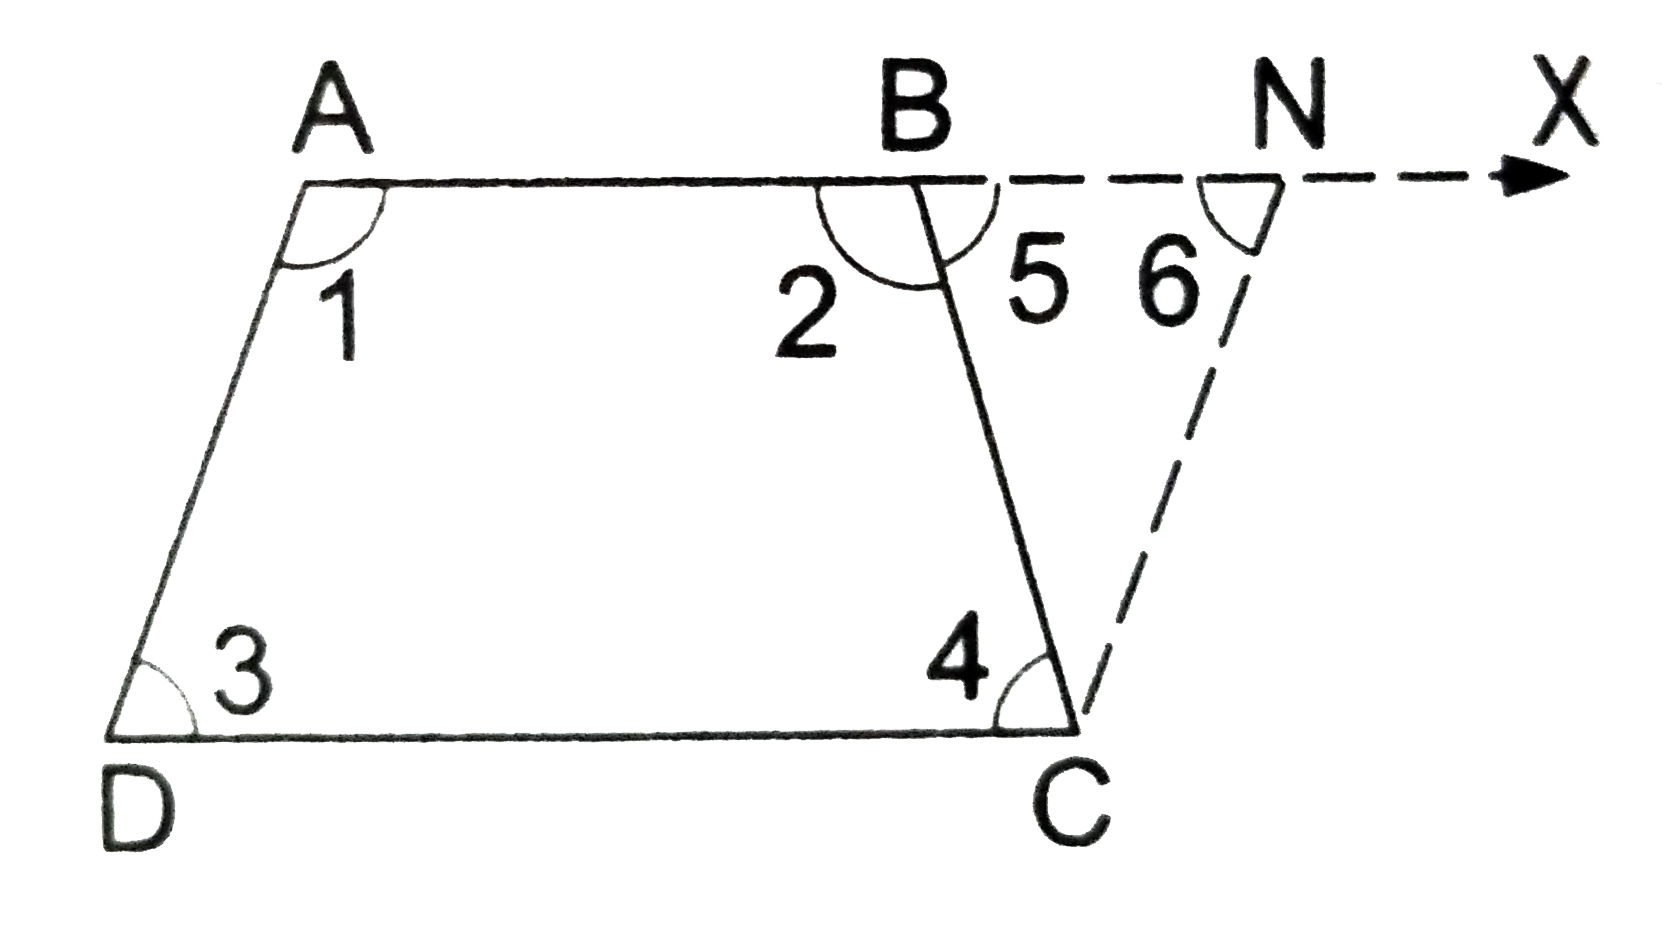 ABCD is a trapezium in which AB||CD and AD = BC. Show that    (i) angle A = angle B and angle C = angle D ,